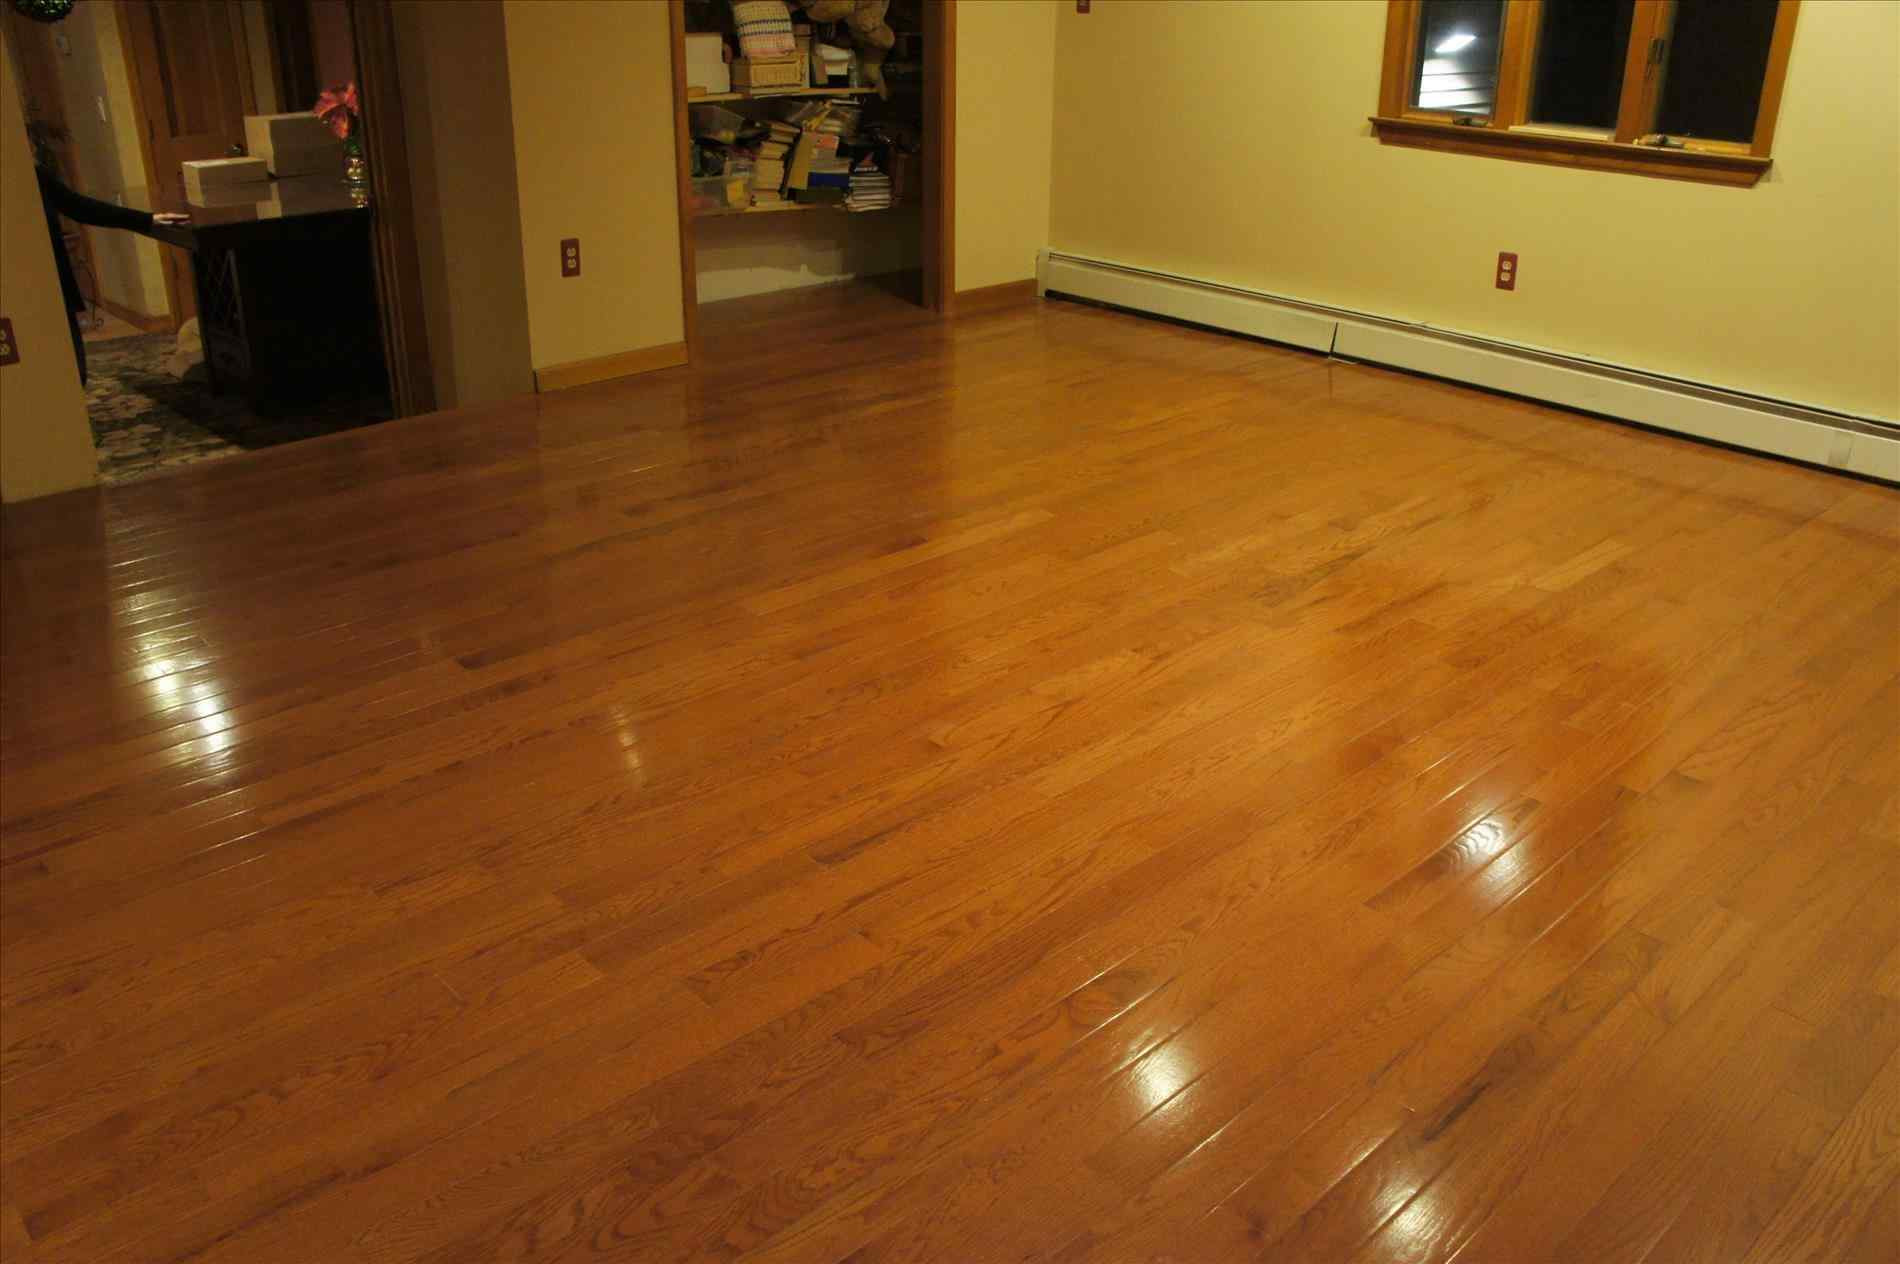 19 Fabulous Bruce Hardwood Flooring Canada 2024 free download bruce hardwood flooring canada of sofa cope page 612 home apartment ideas with hardwood floor colors floors red oak floor gallery cfc rhpinterestcom bruce in butterscotch color gaithersburg 